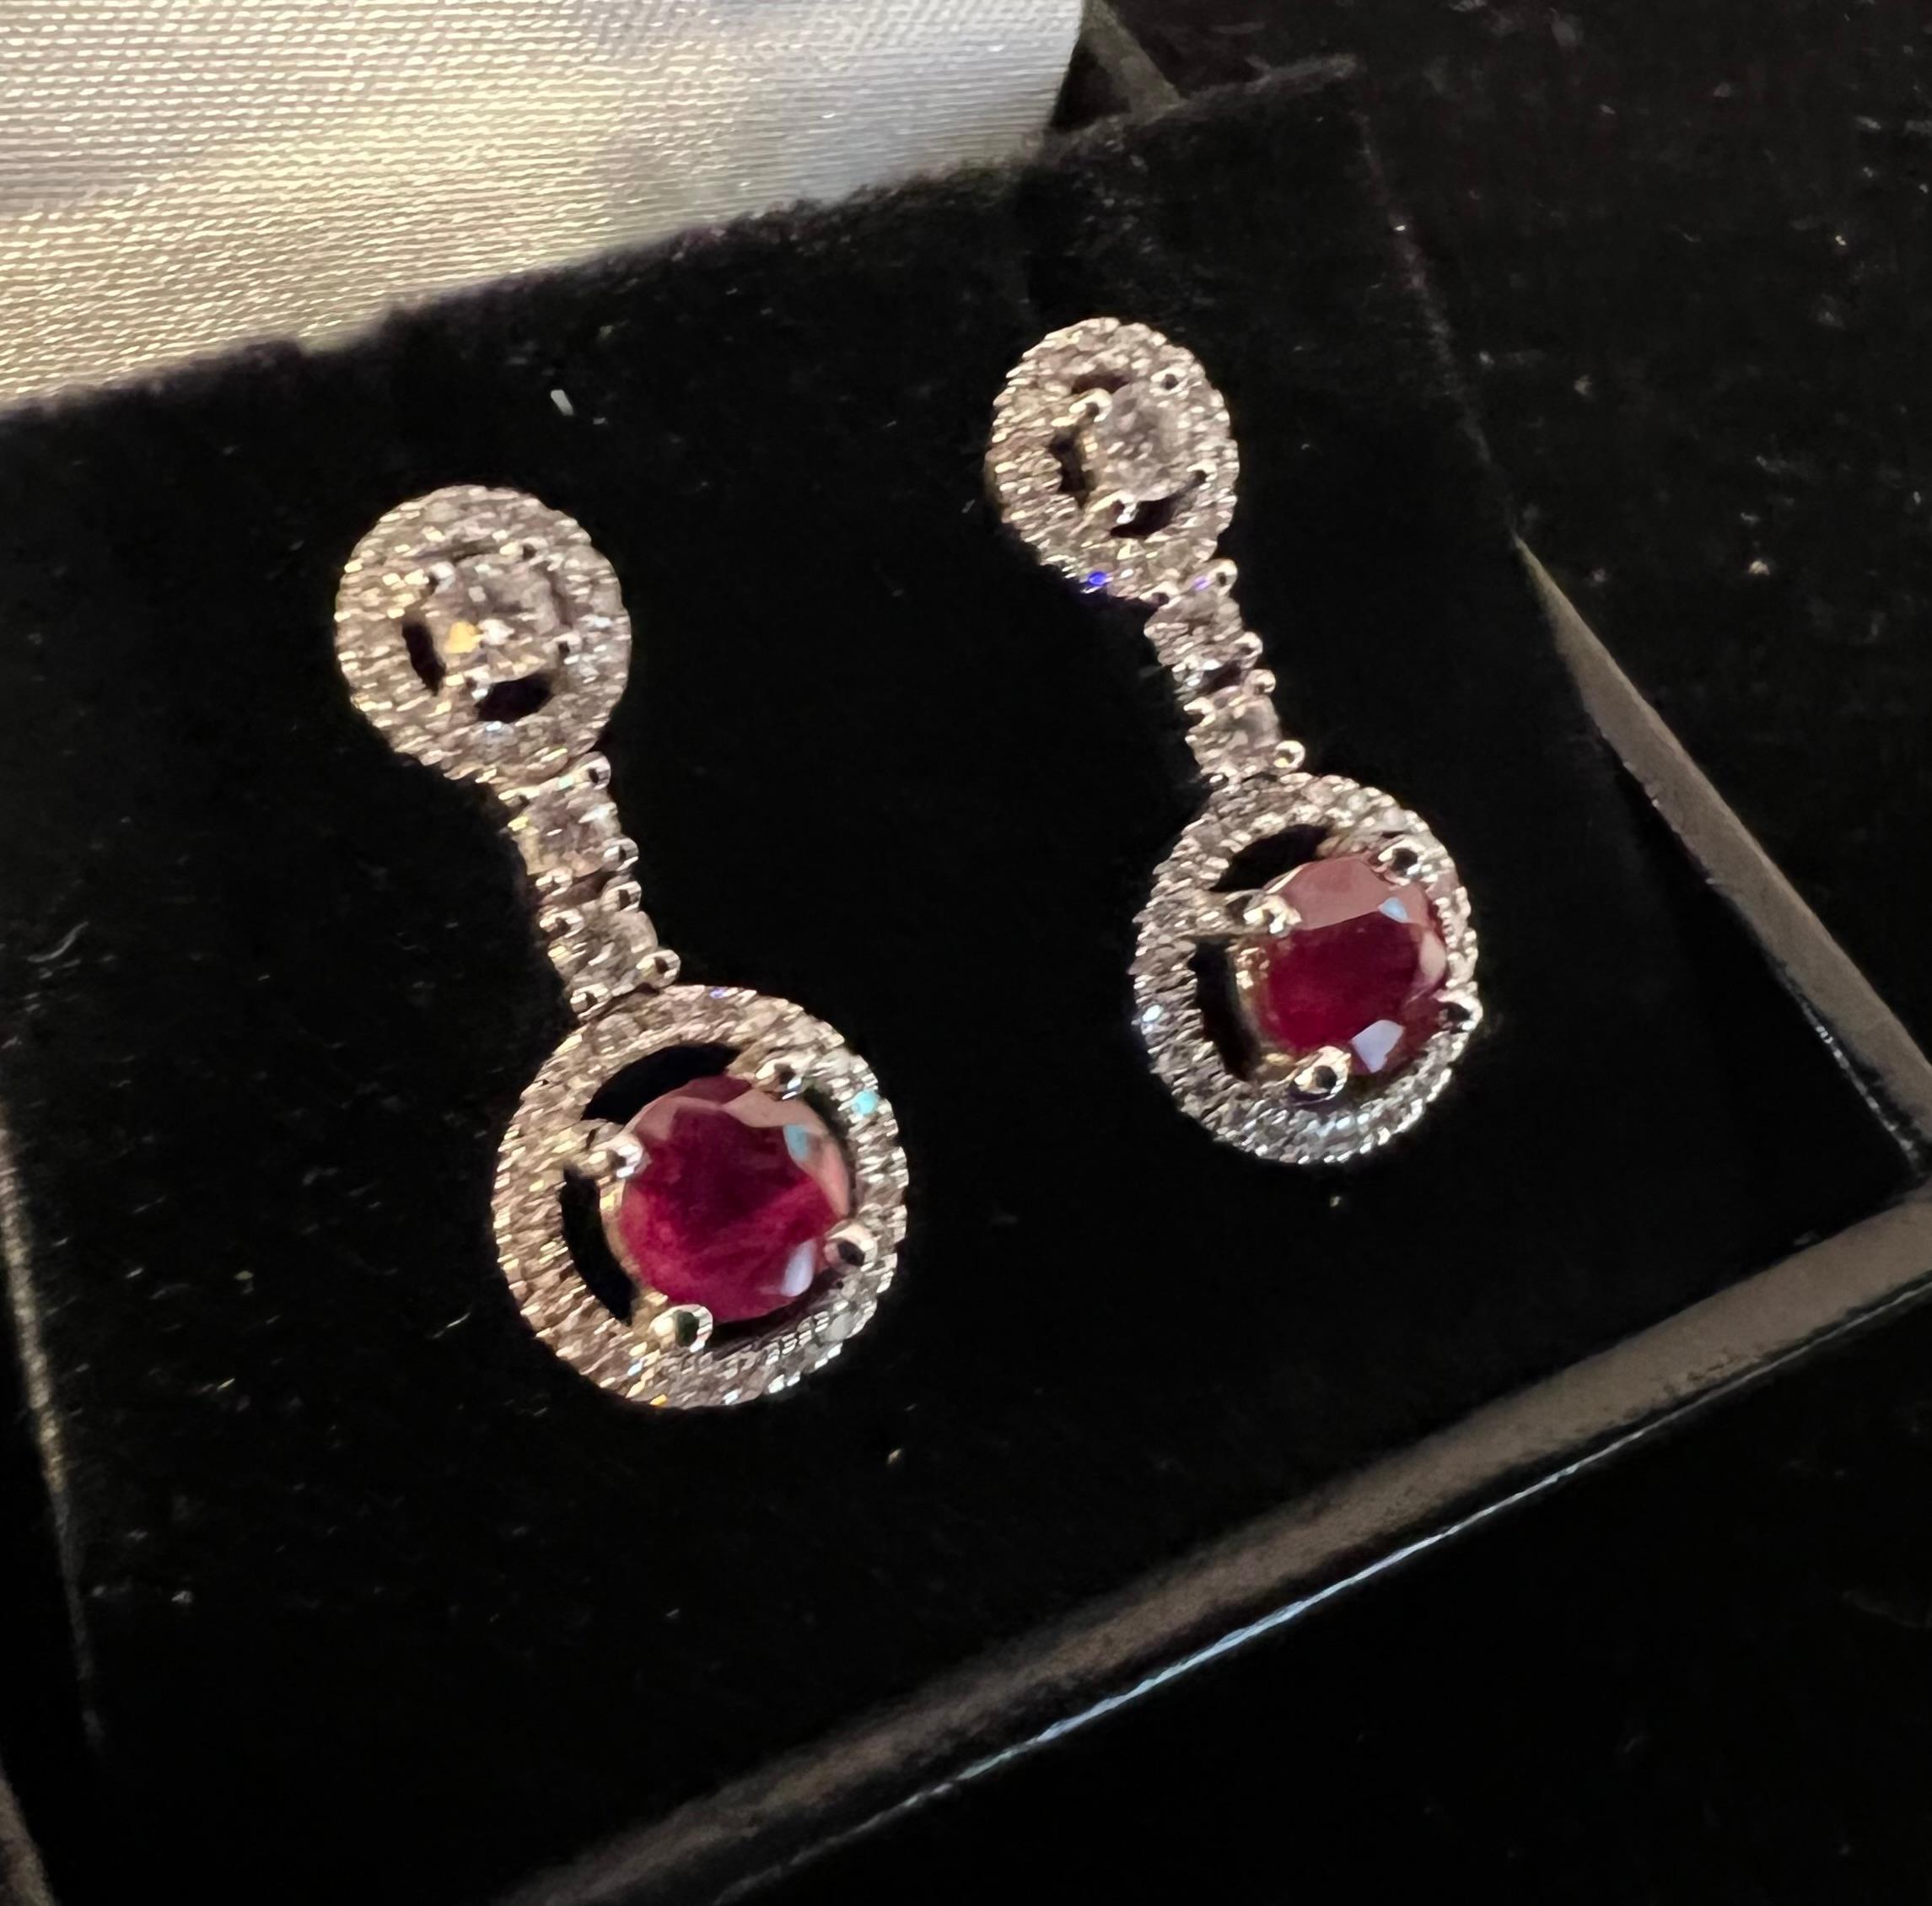 18ct white gold earrings set with two rubies totaling 1.07ct and paved with brilliants totaling approximately 0.47ct. length: 2cm push rod clasp. the ruby surrounded by brilliants: 1cm in diameter